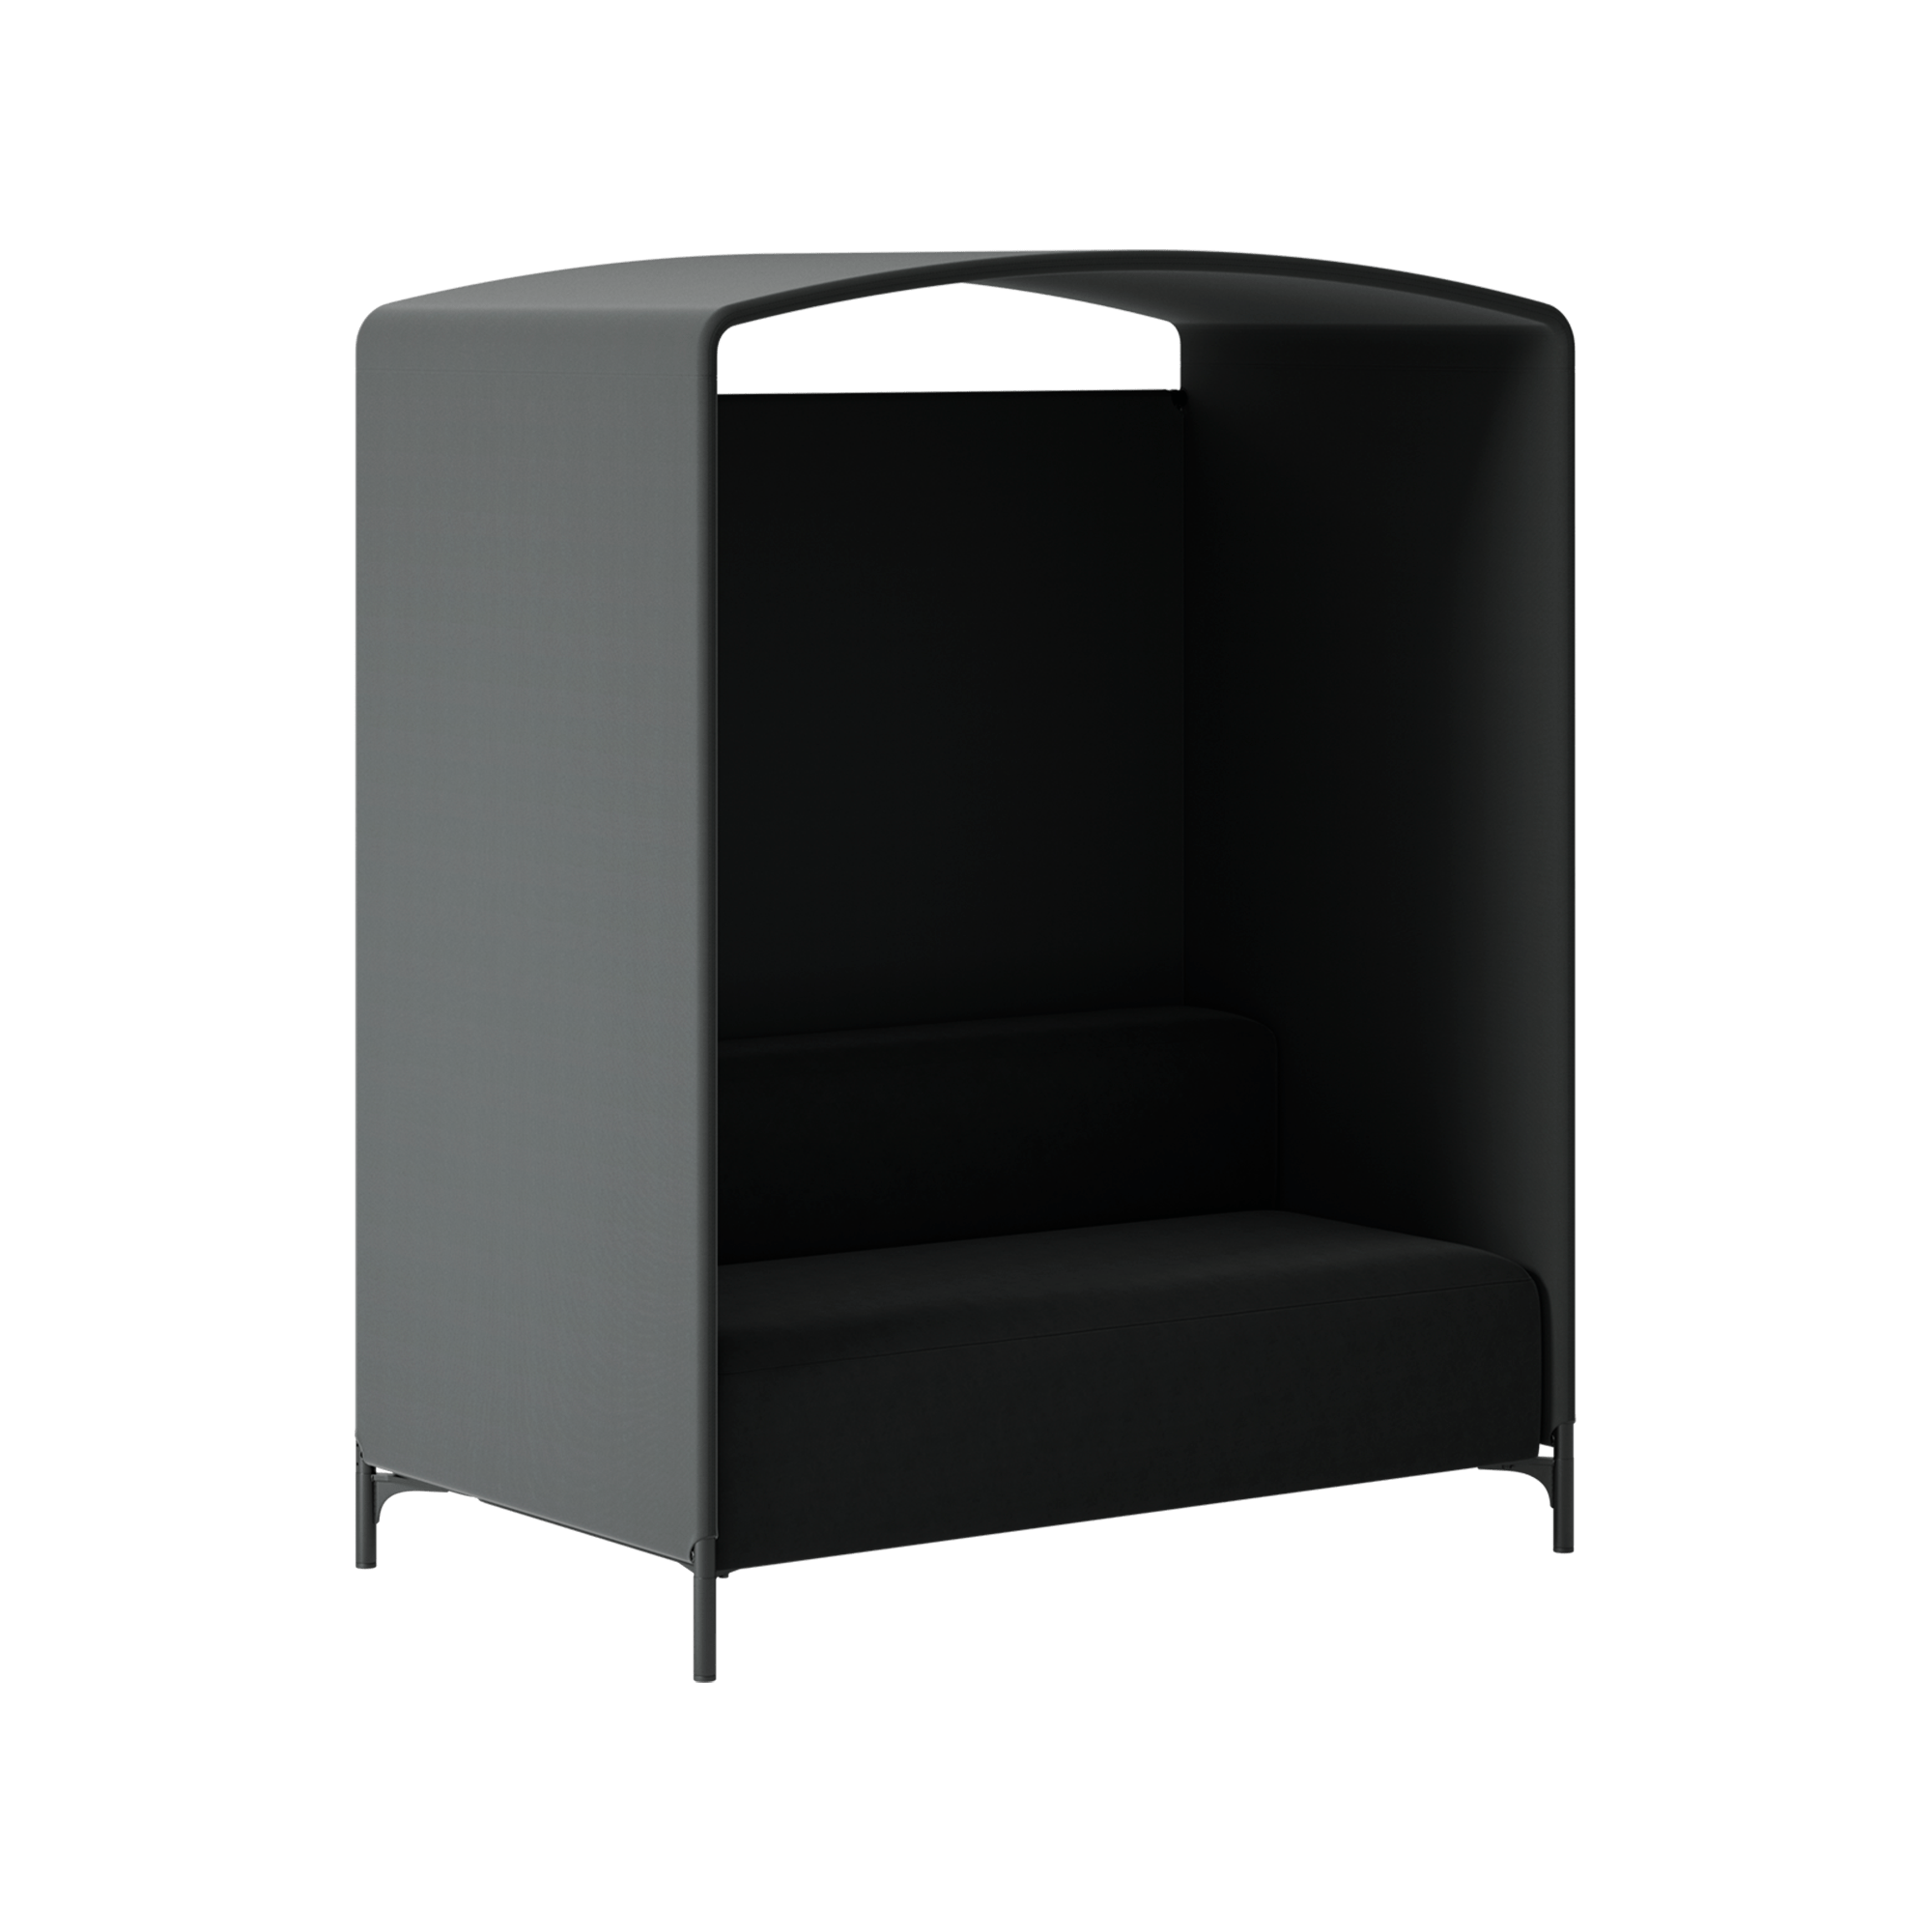 Office work booth with three sided enclosed panels and small desk.